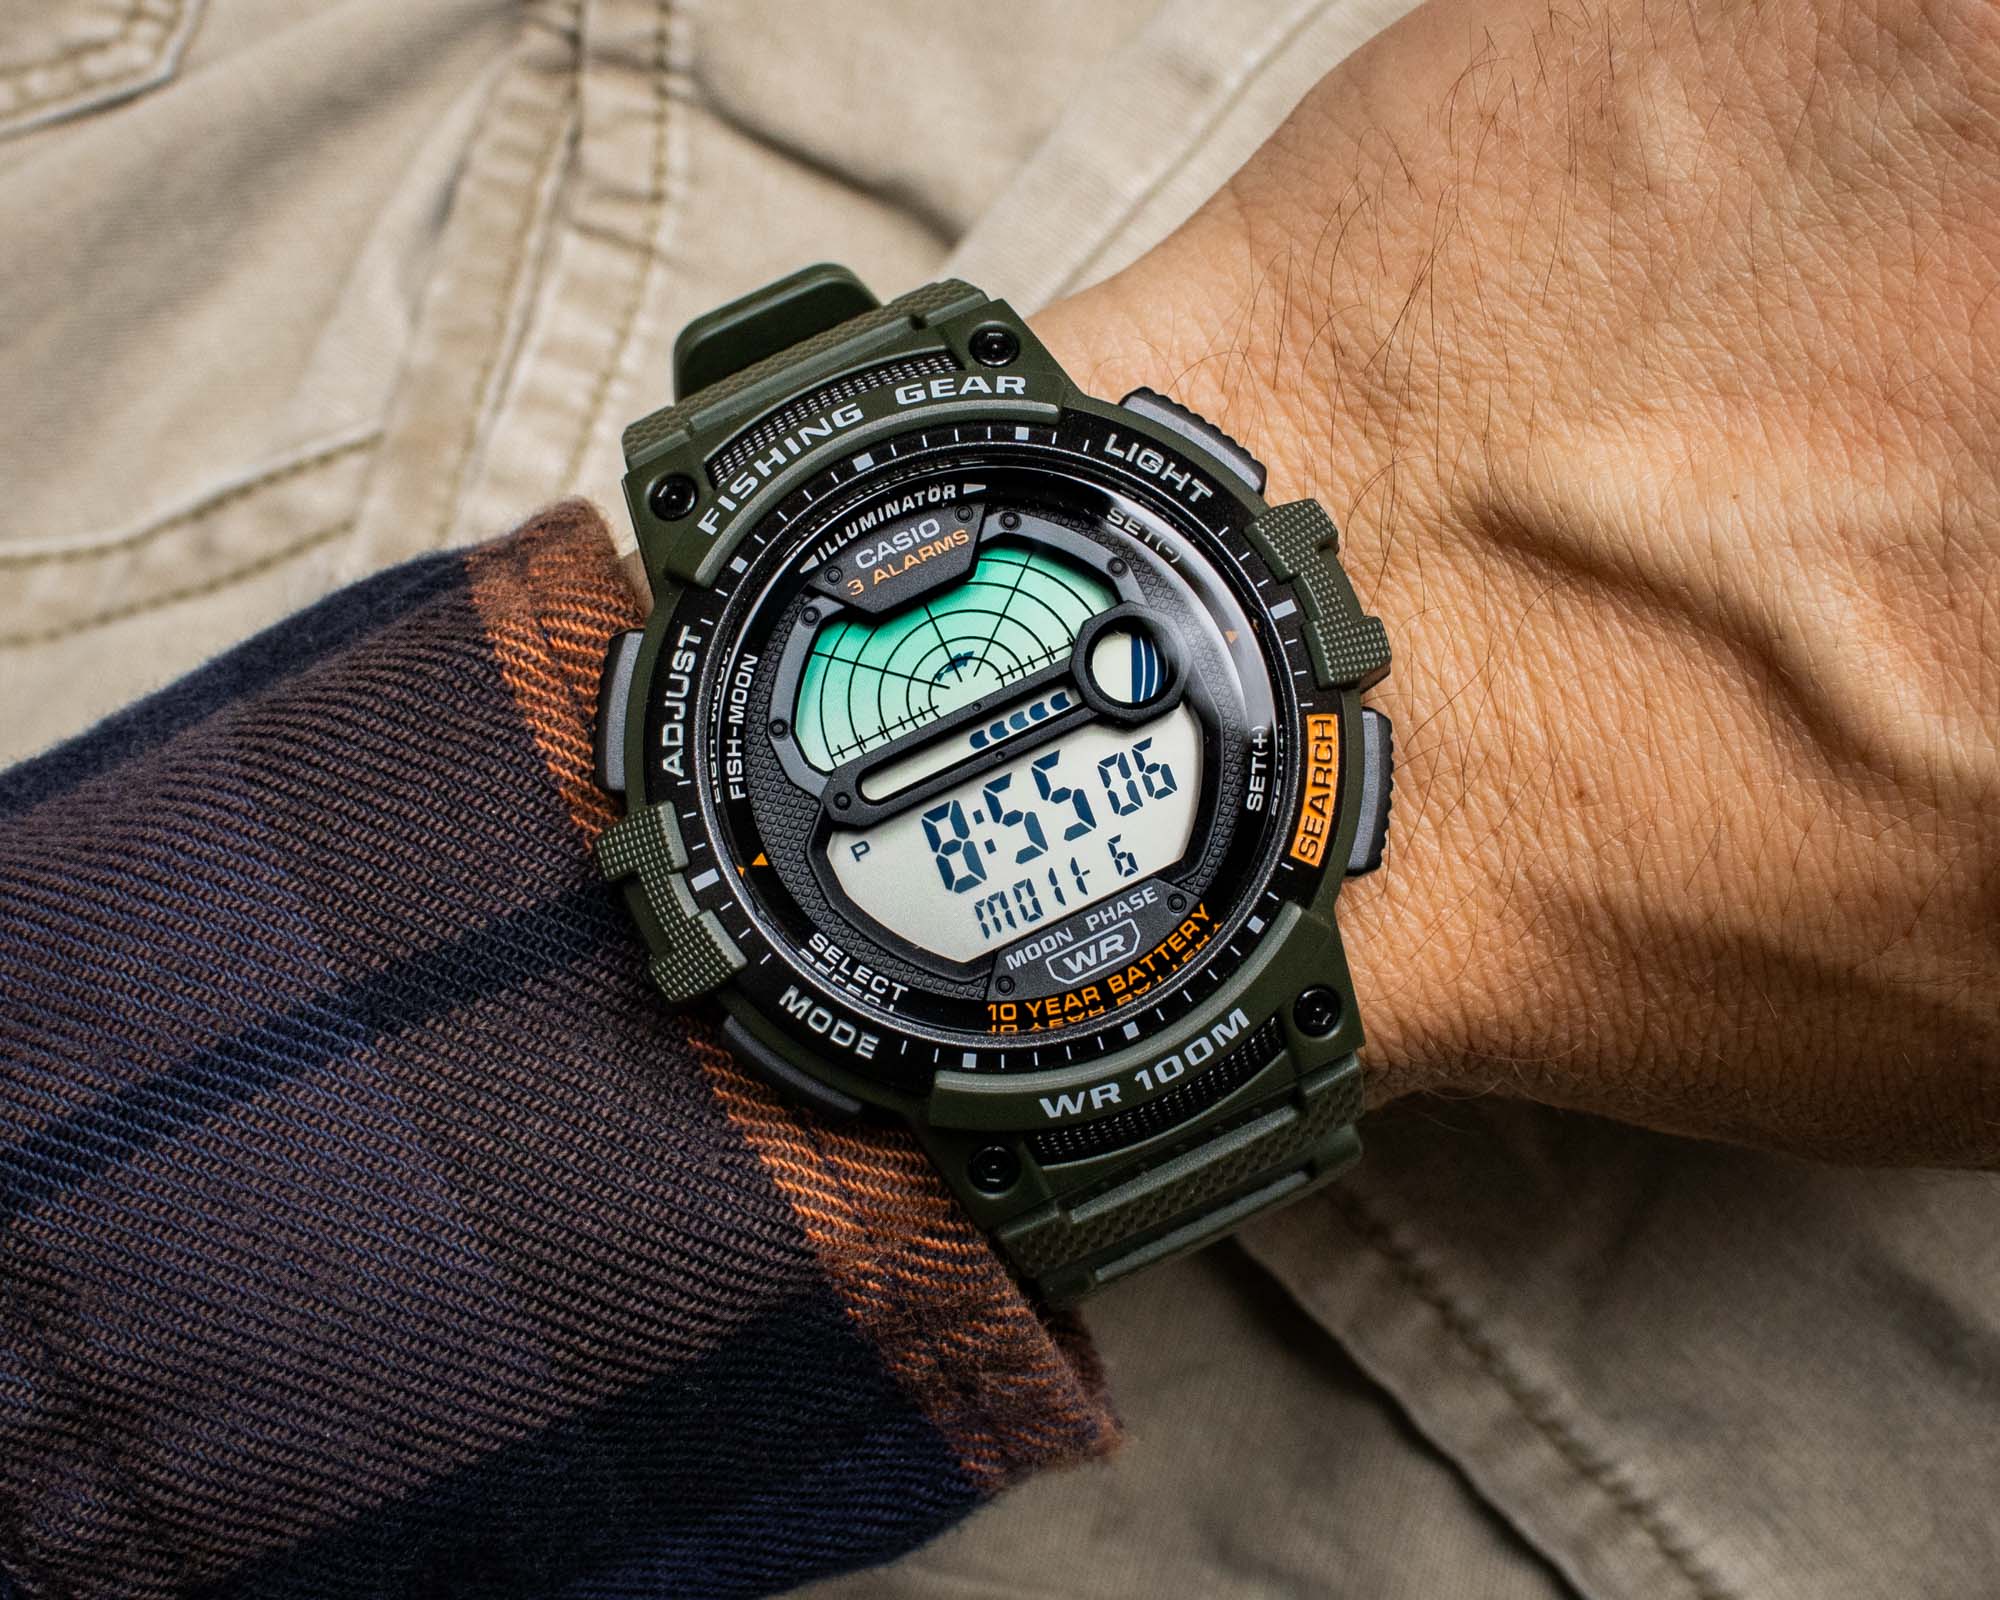 Actually Affordable: Casio Fishing Gear WS1200H Watch